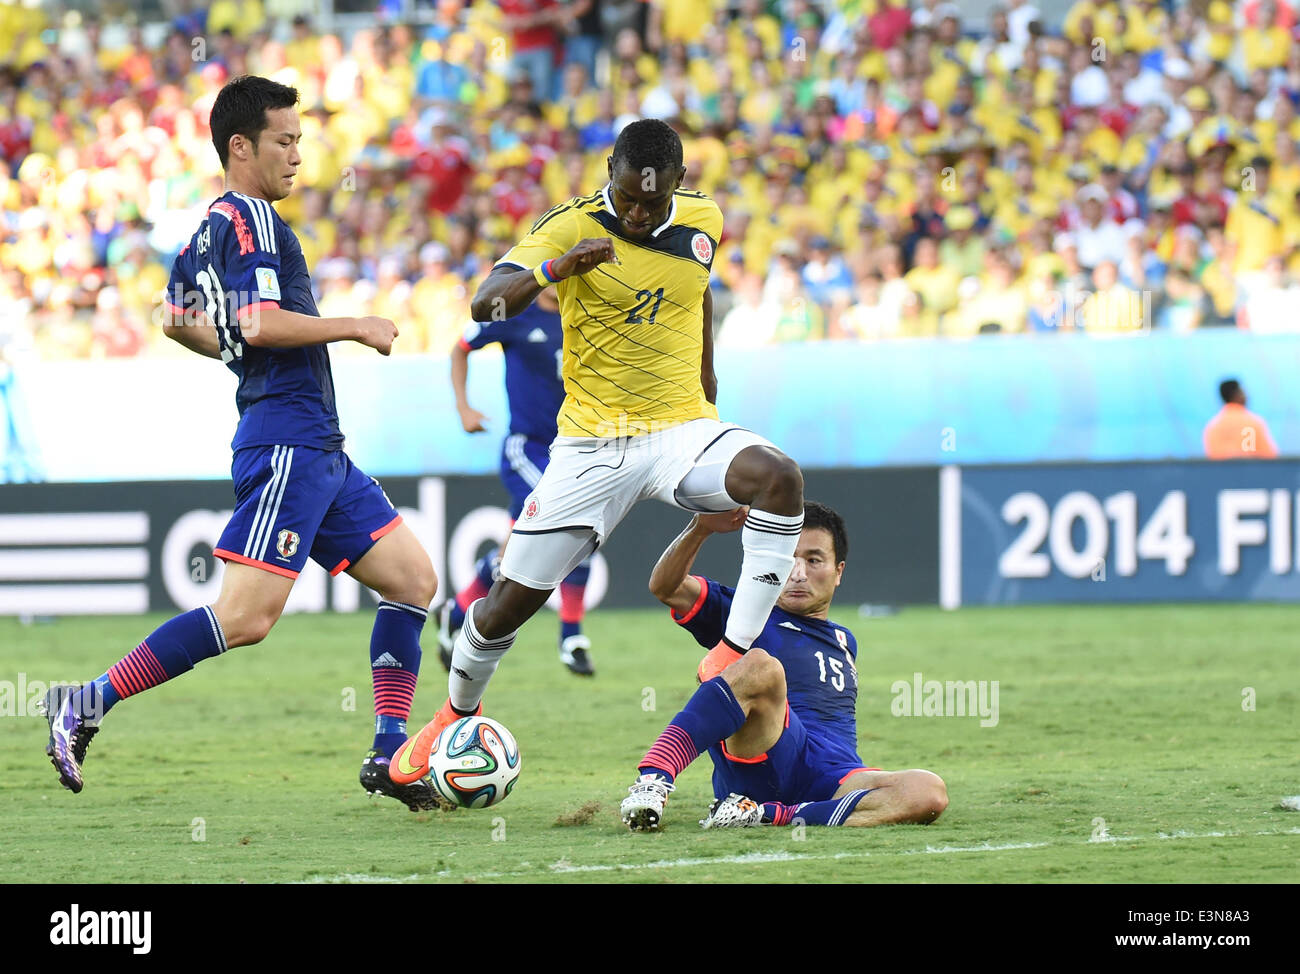 Cuiaba, Brazil. 24th June, 2014. Colombia's Jackson Martinez breaks through during a Group C match between Japan and Colombia of 2014 FIFA World Cup at the Arena Pantanal Stadium in Cuiaba, Brazil, June 24, 2014. © Liu Dawei/Xinhua/Alamy Live News Stock Photo